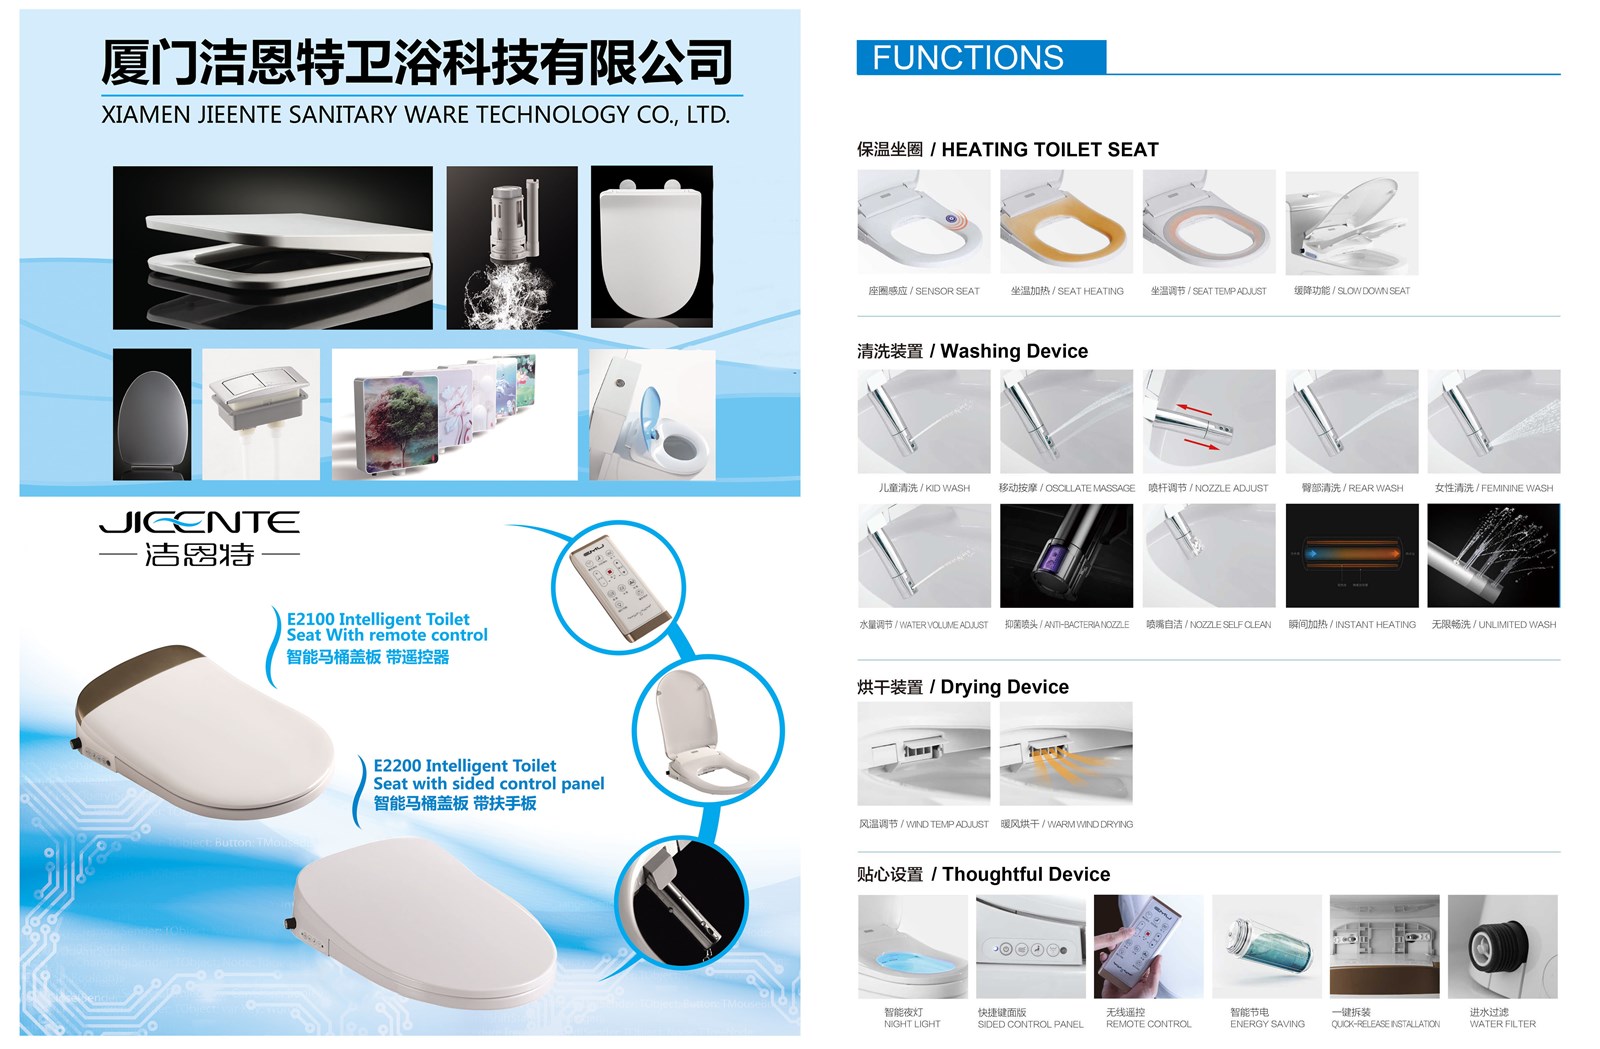 Bidet Electronic Cover Smart Electrical intelligent Heated Soft Closed seat cover for Toilet Bowl